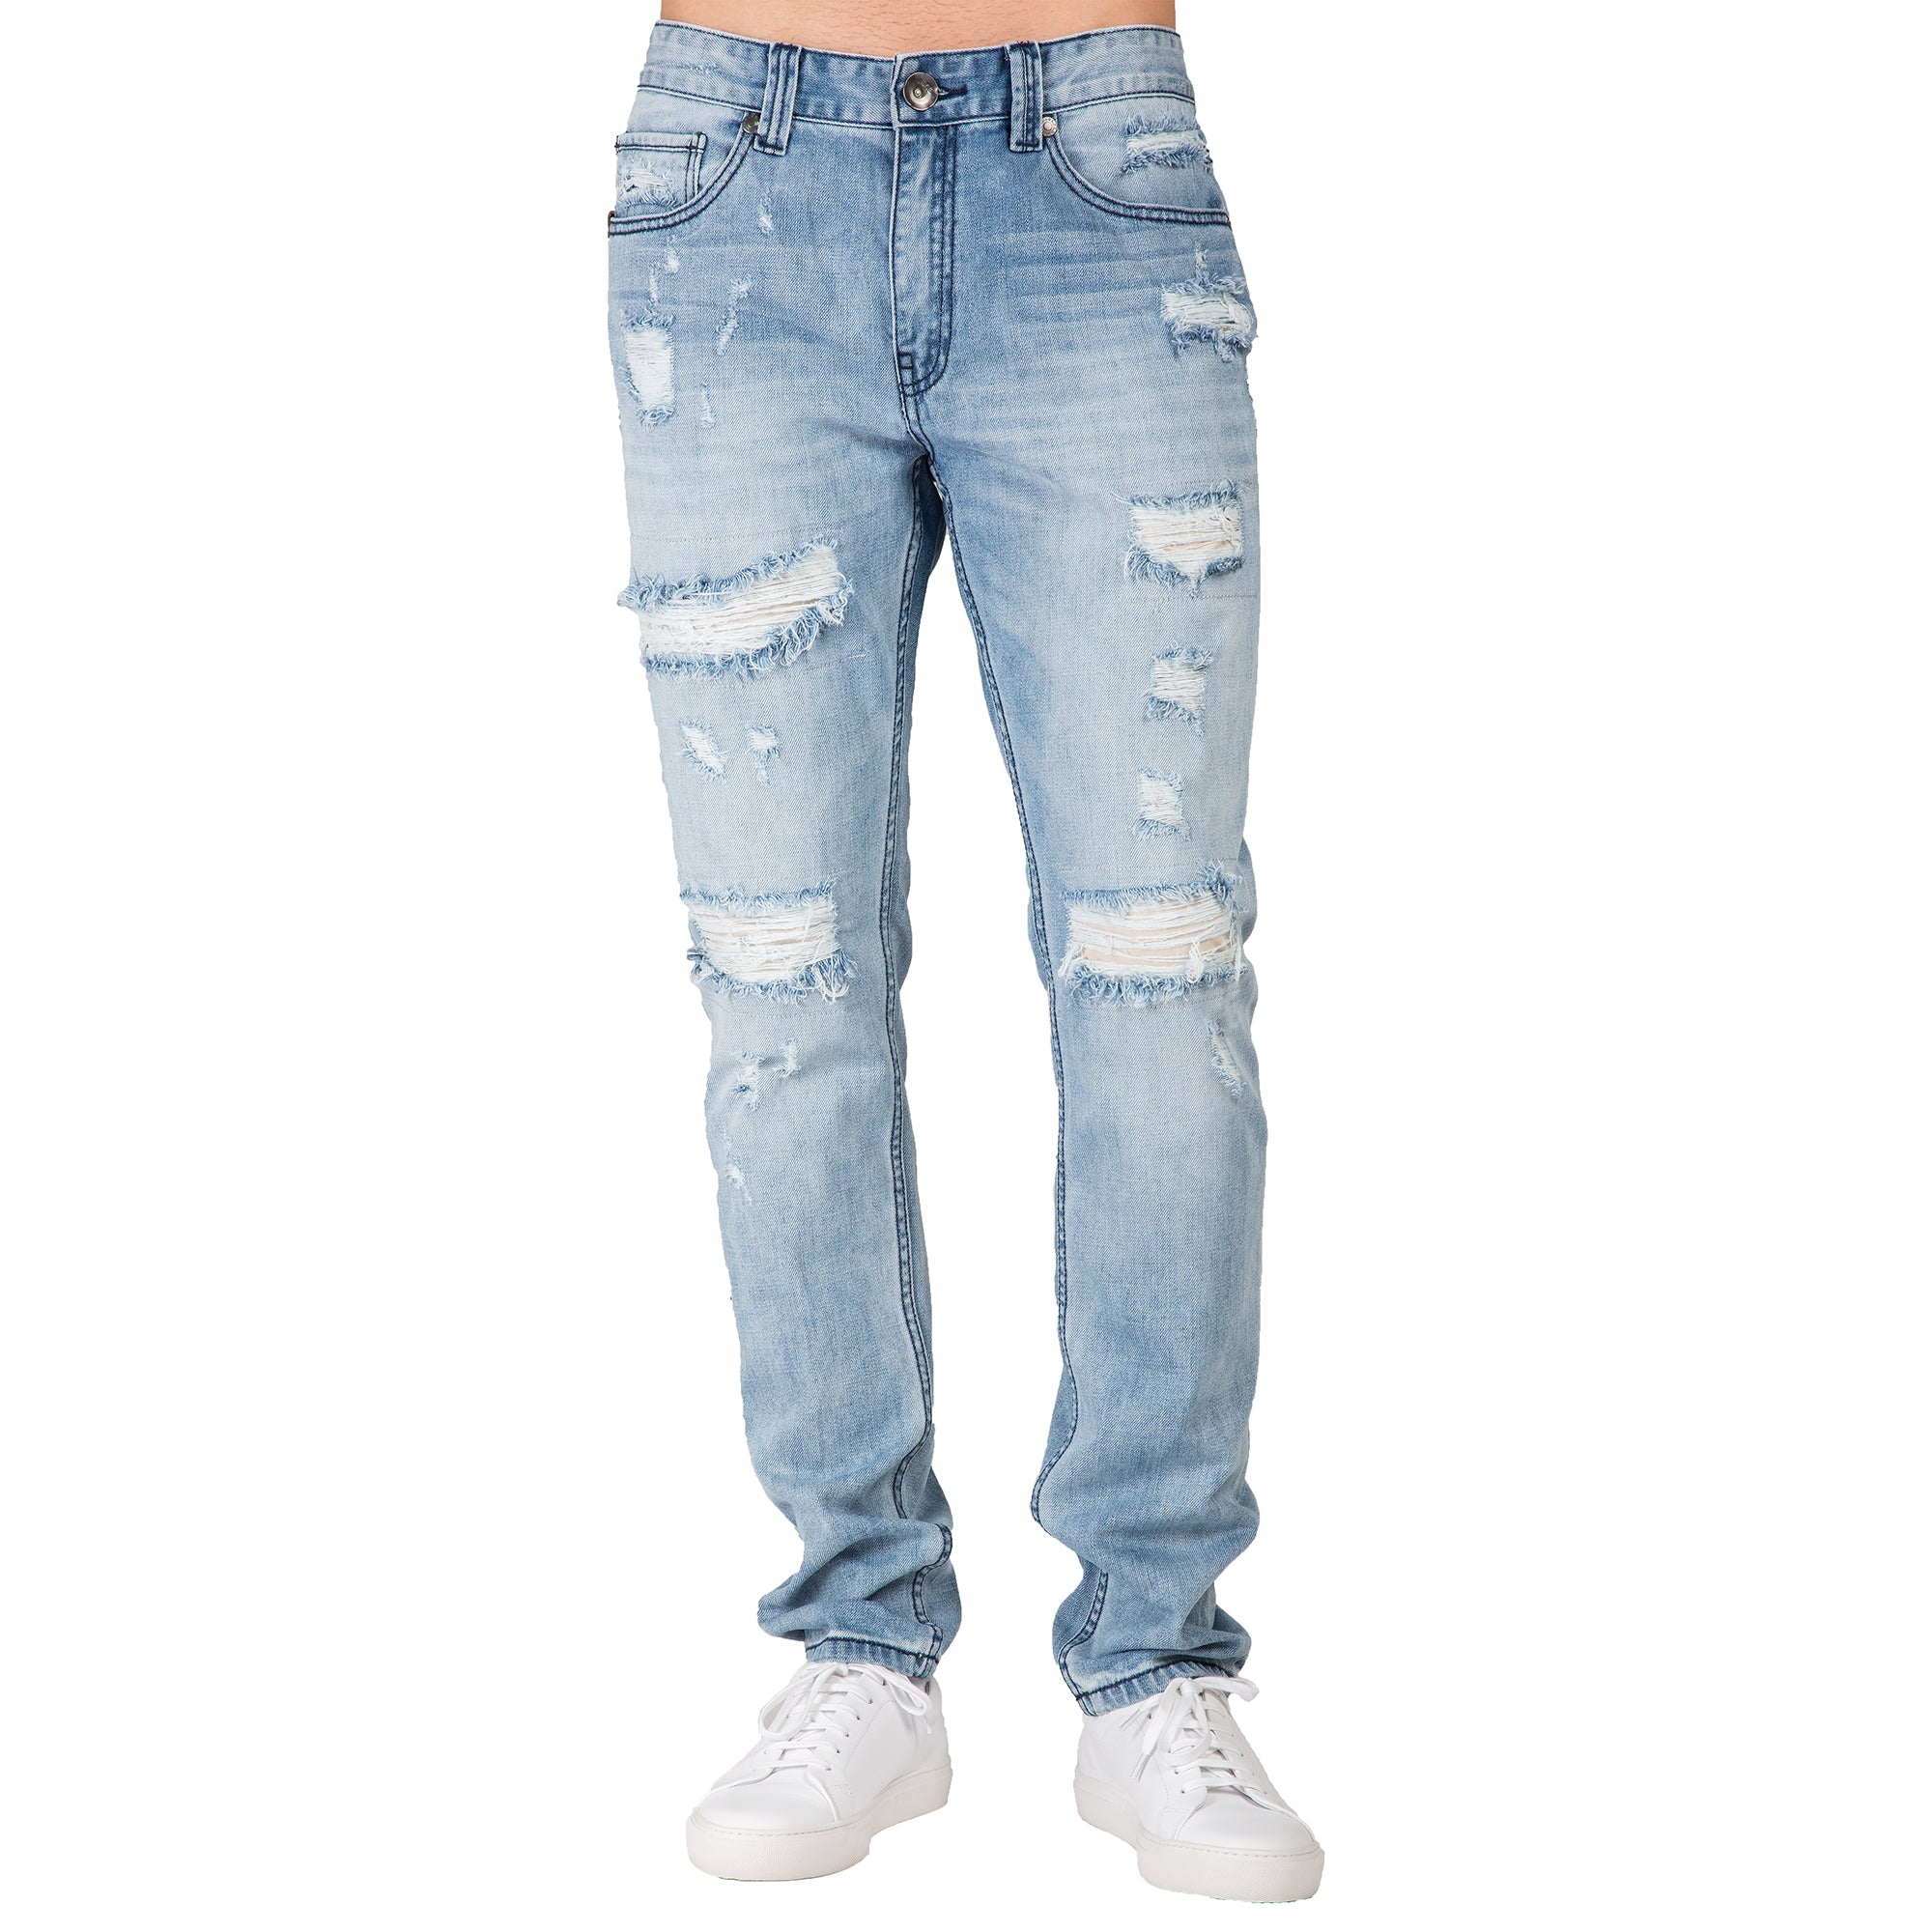 Blue Denim Slim Fit Mens Ripped Skinny Jeans With Ripped Detailing, Light  Color, Skinny Pencil Pants, And Zipper Closure From Cinda01, $21.33 |  DHgate.Com